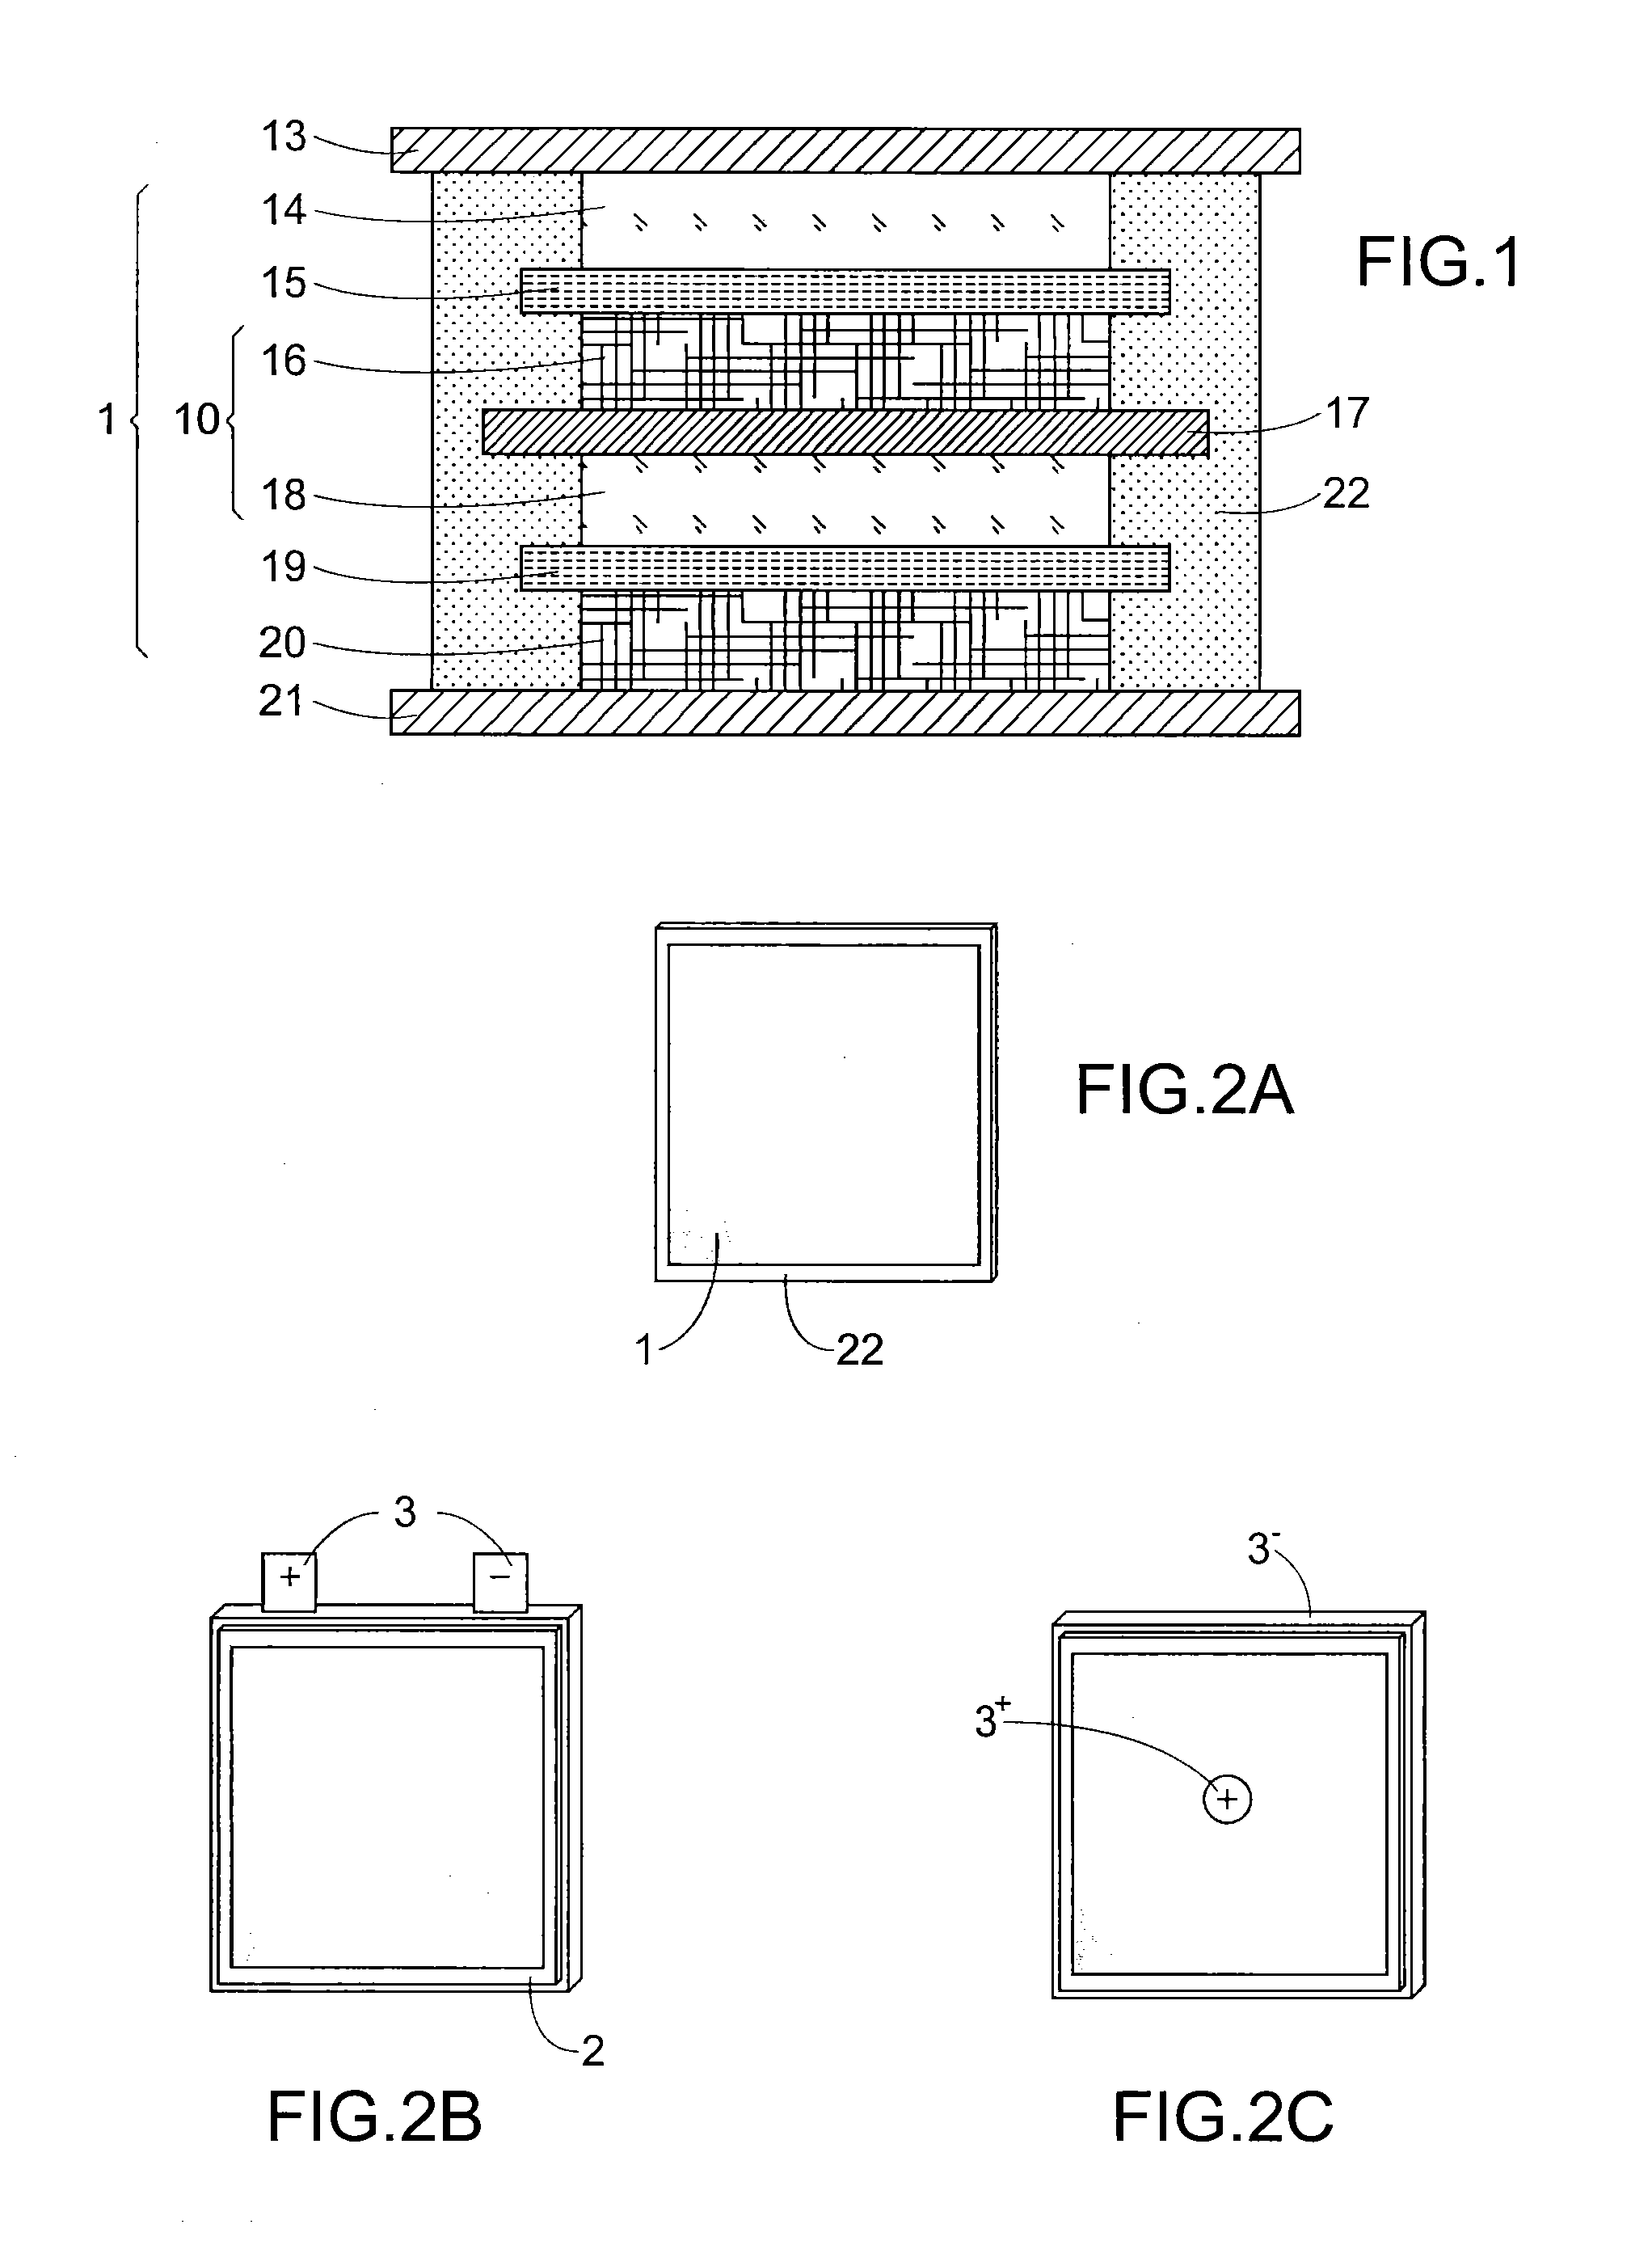 Bipolar electrochemical battery with an improved casing